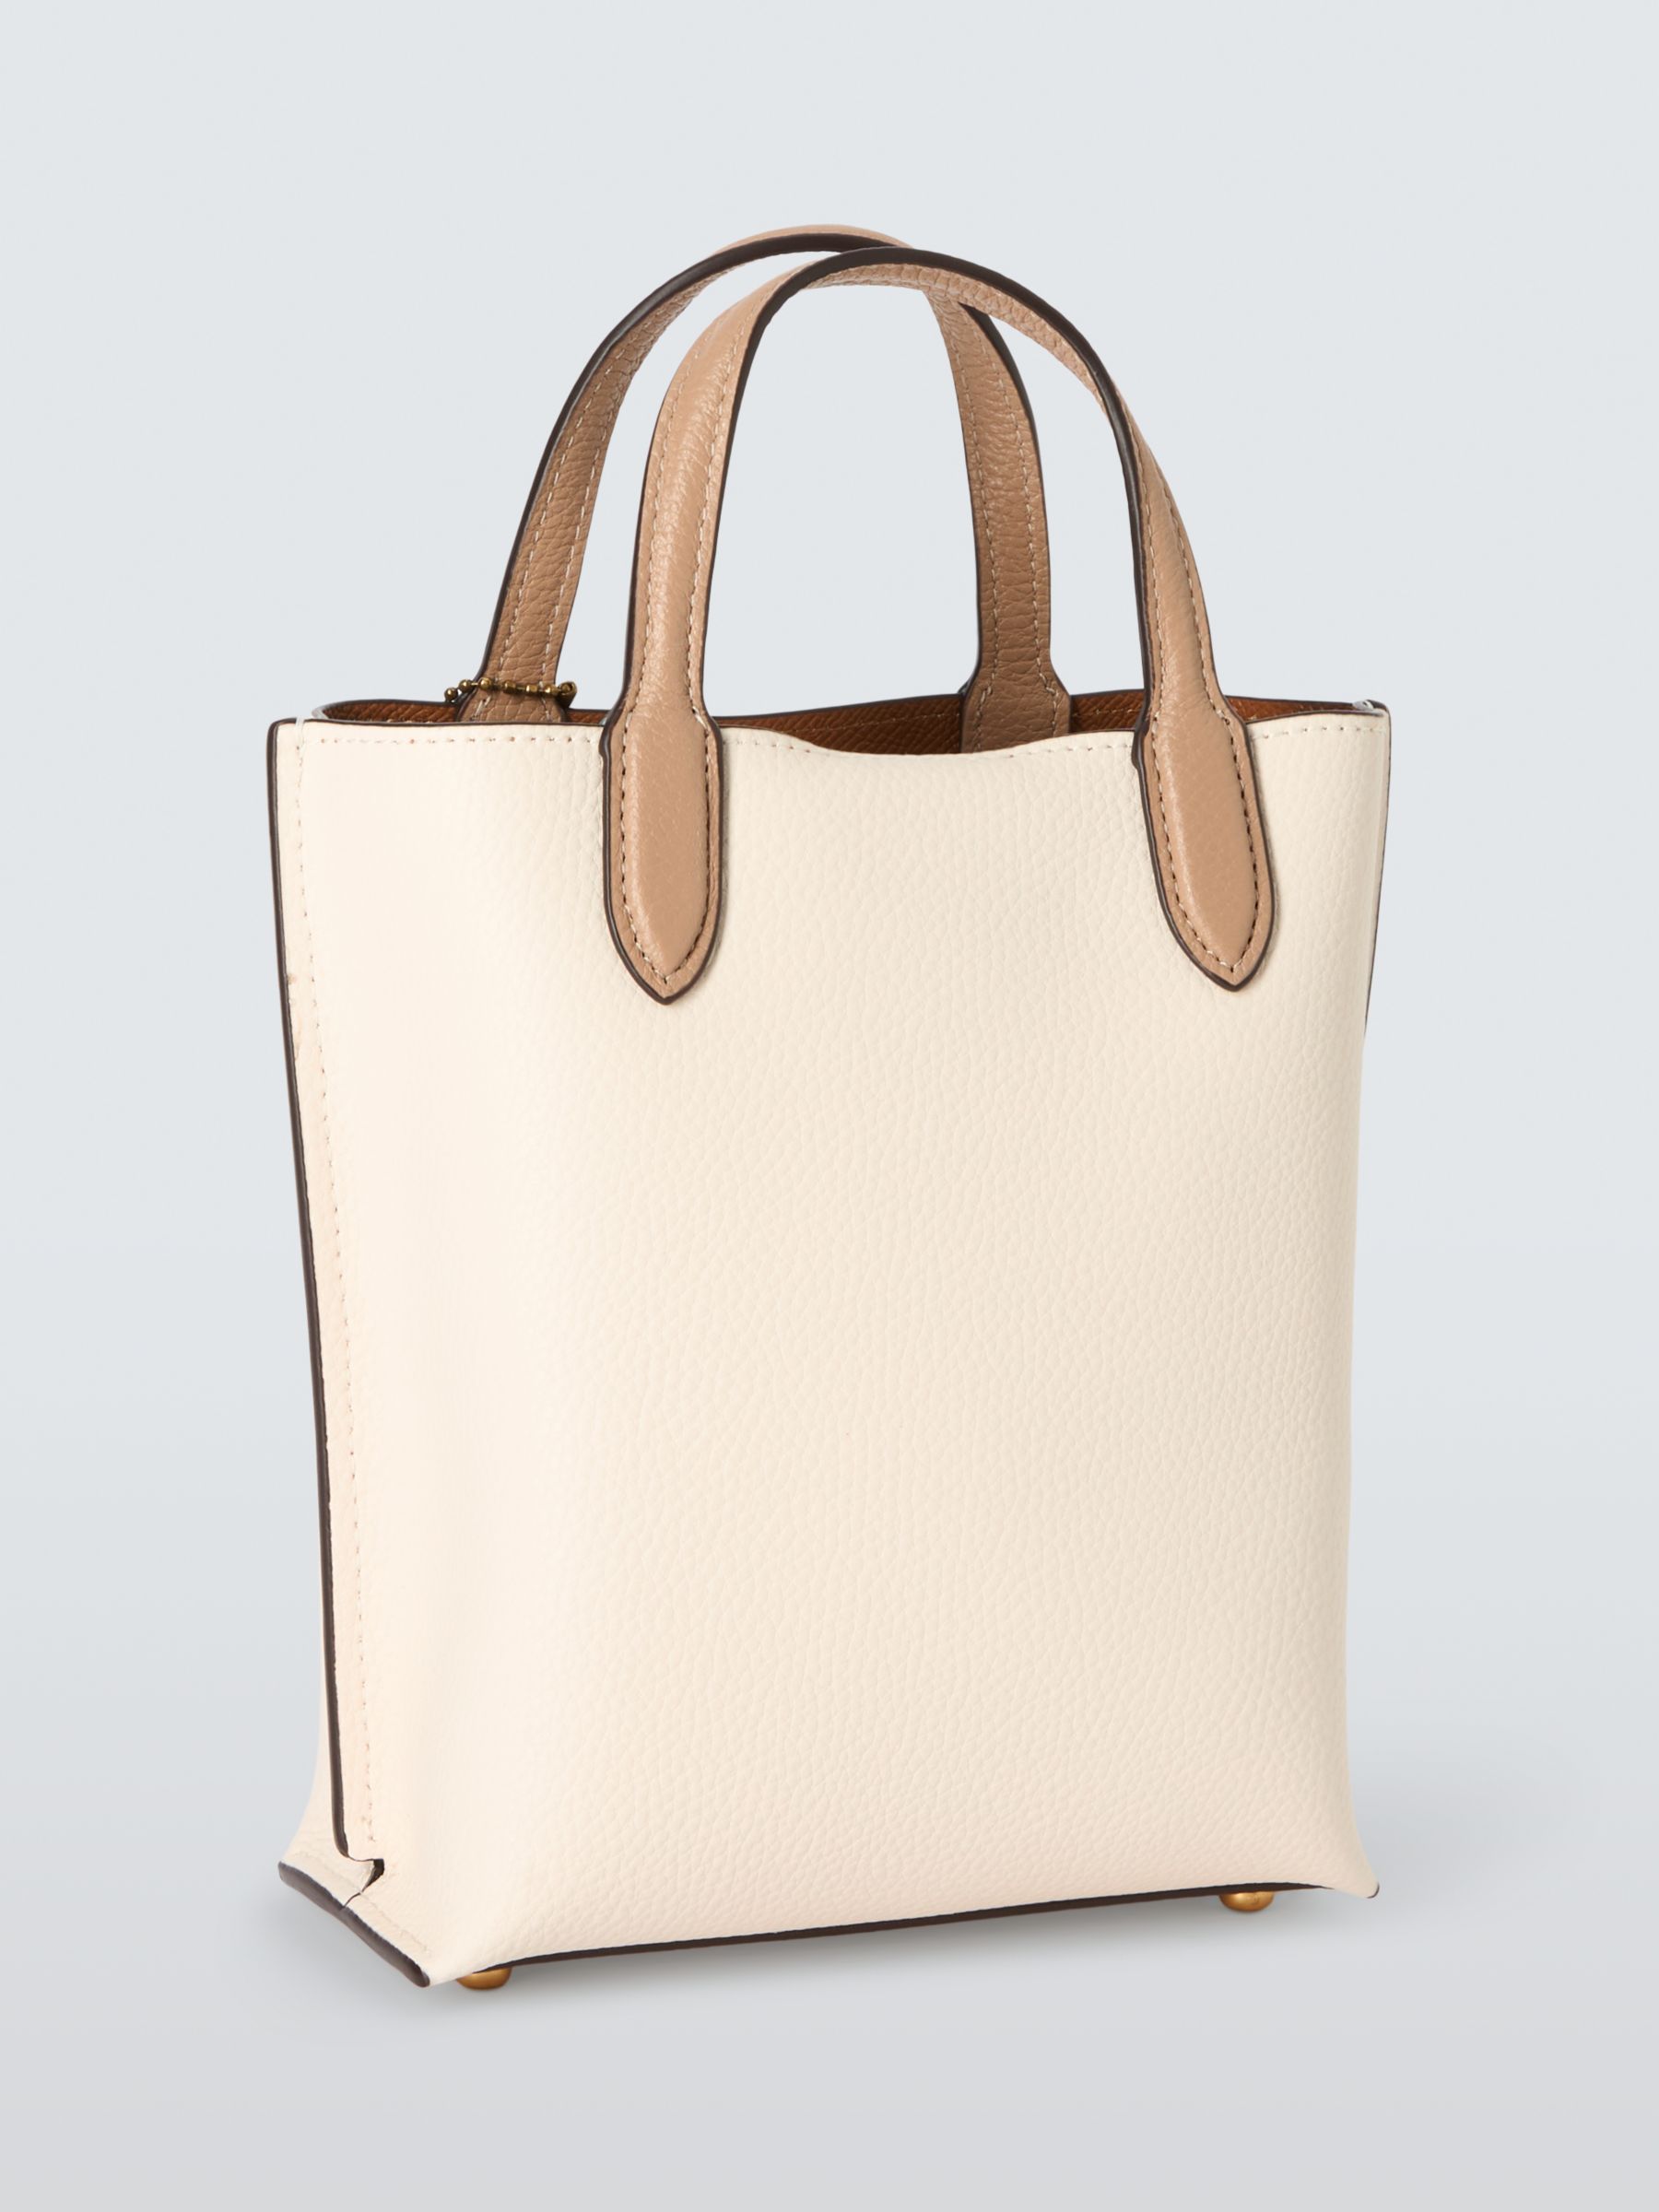 Buy Coach Willow 16 Leather Tote Bag Online at johnlewis.com